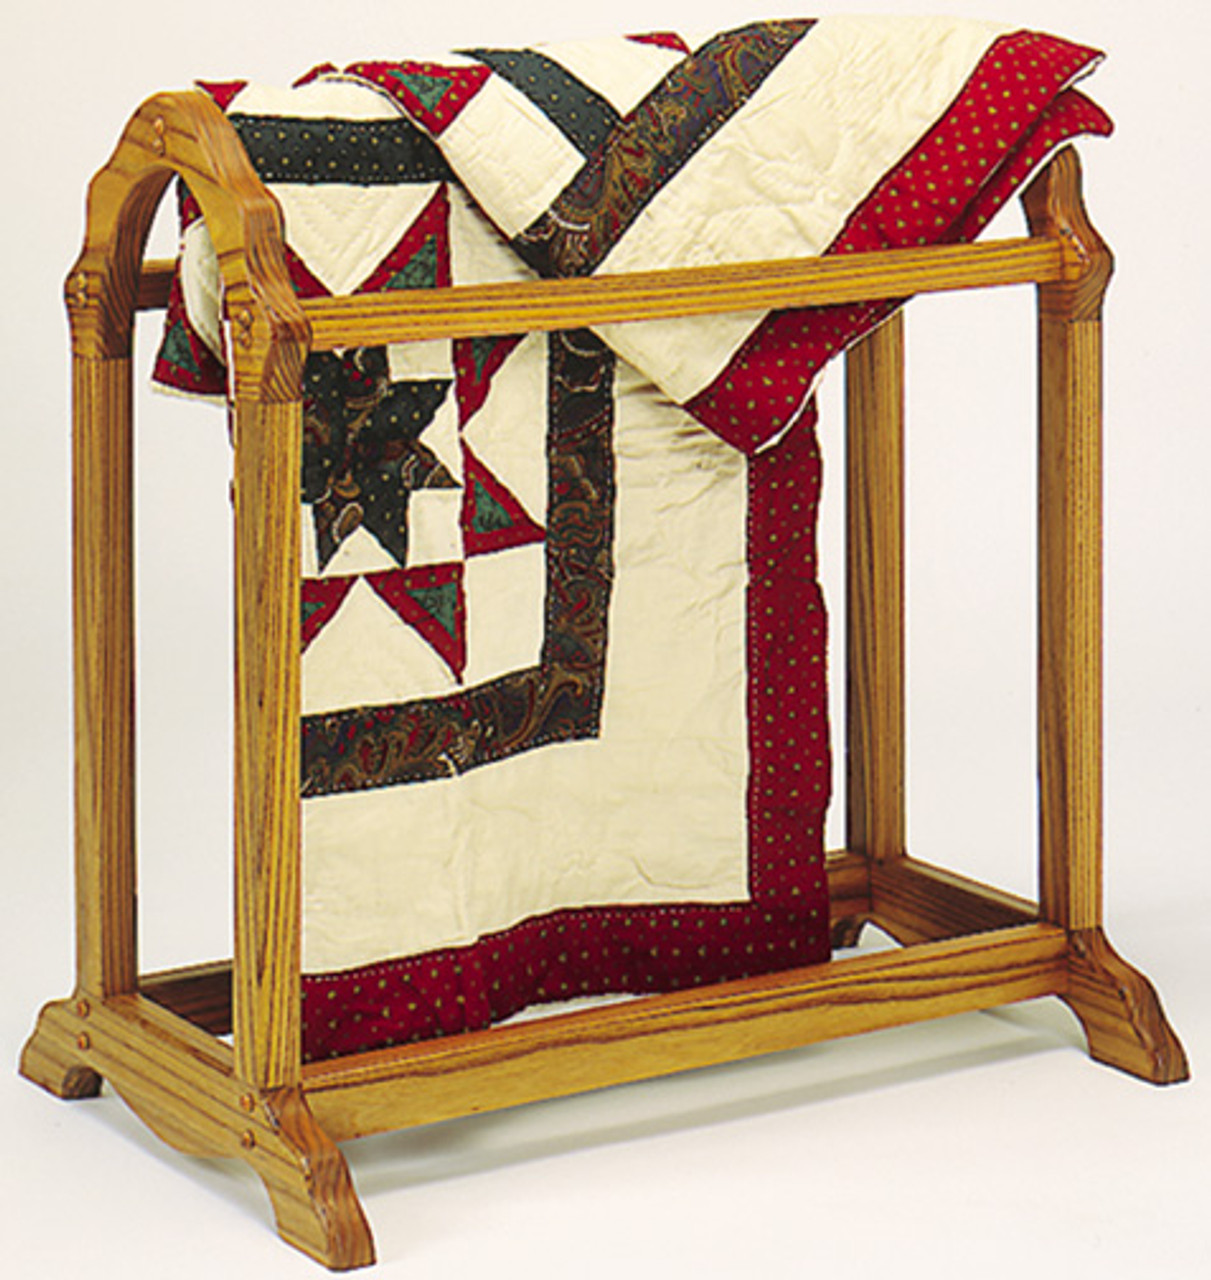 Swinging-Arm Quilt Rack Woodworking Plan from WOOD Magazine